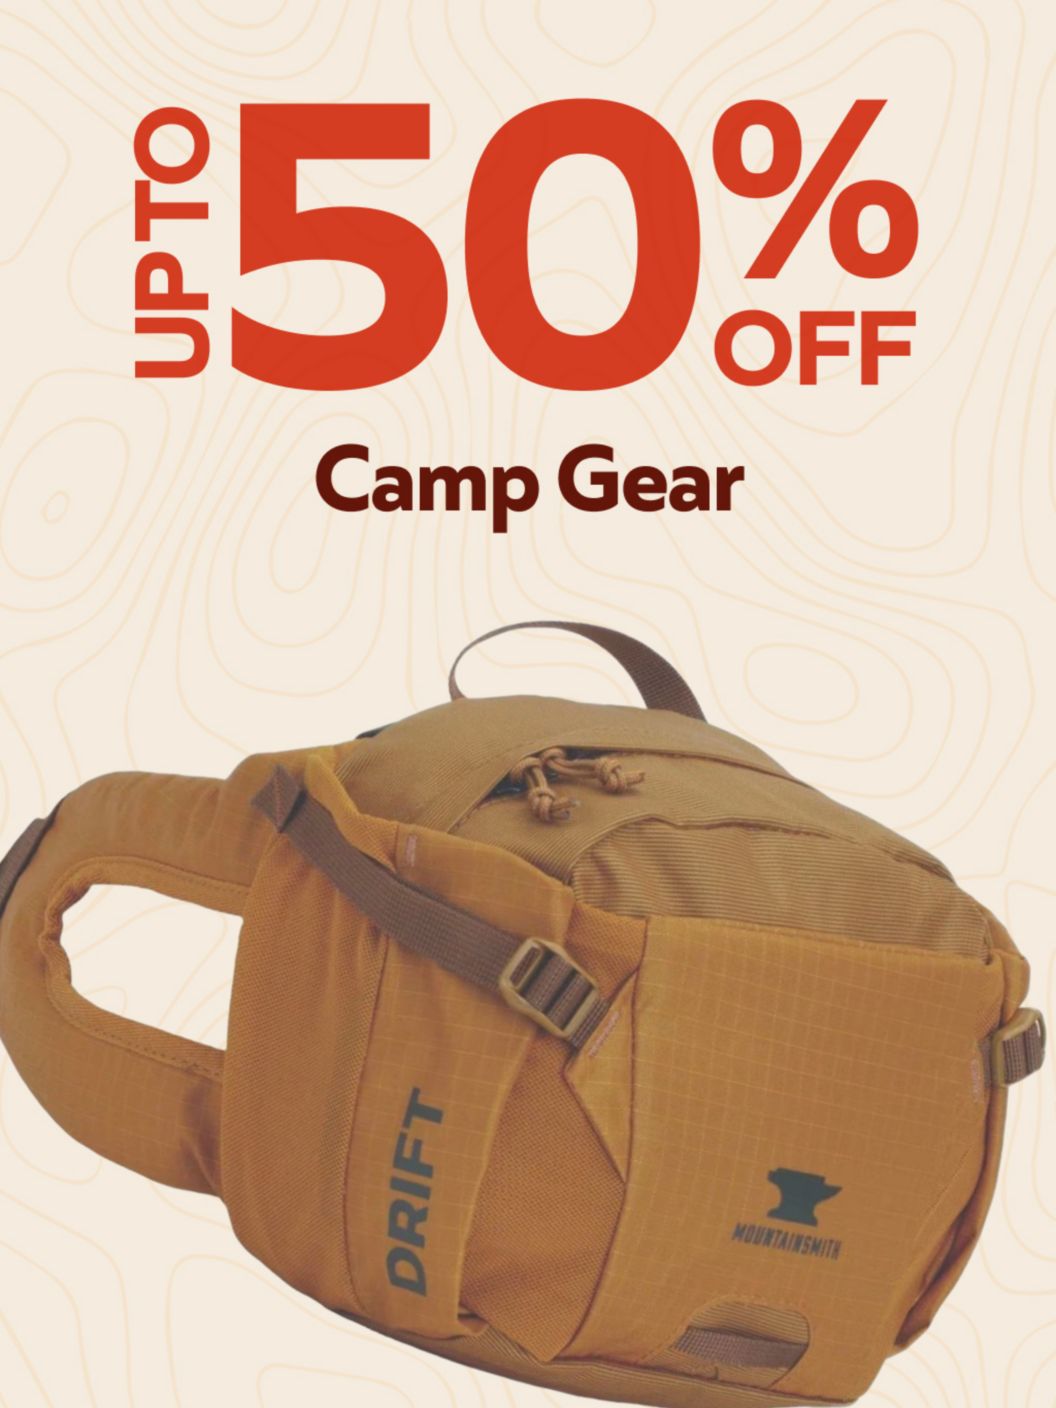 Camp gear up to 50% off